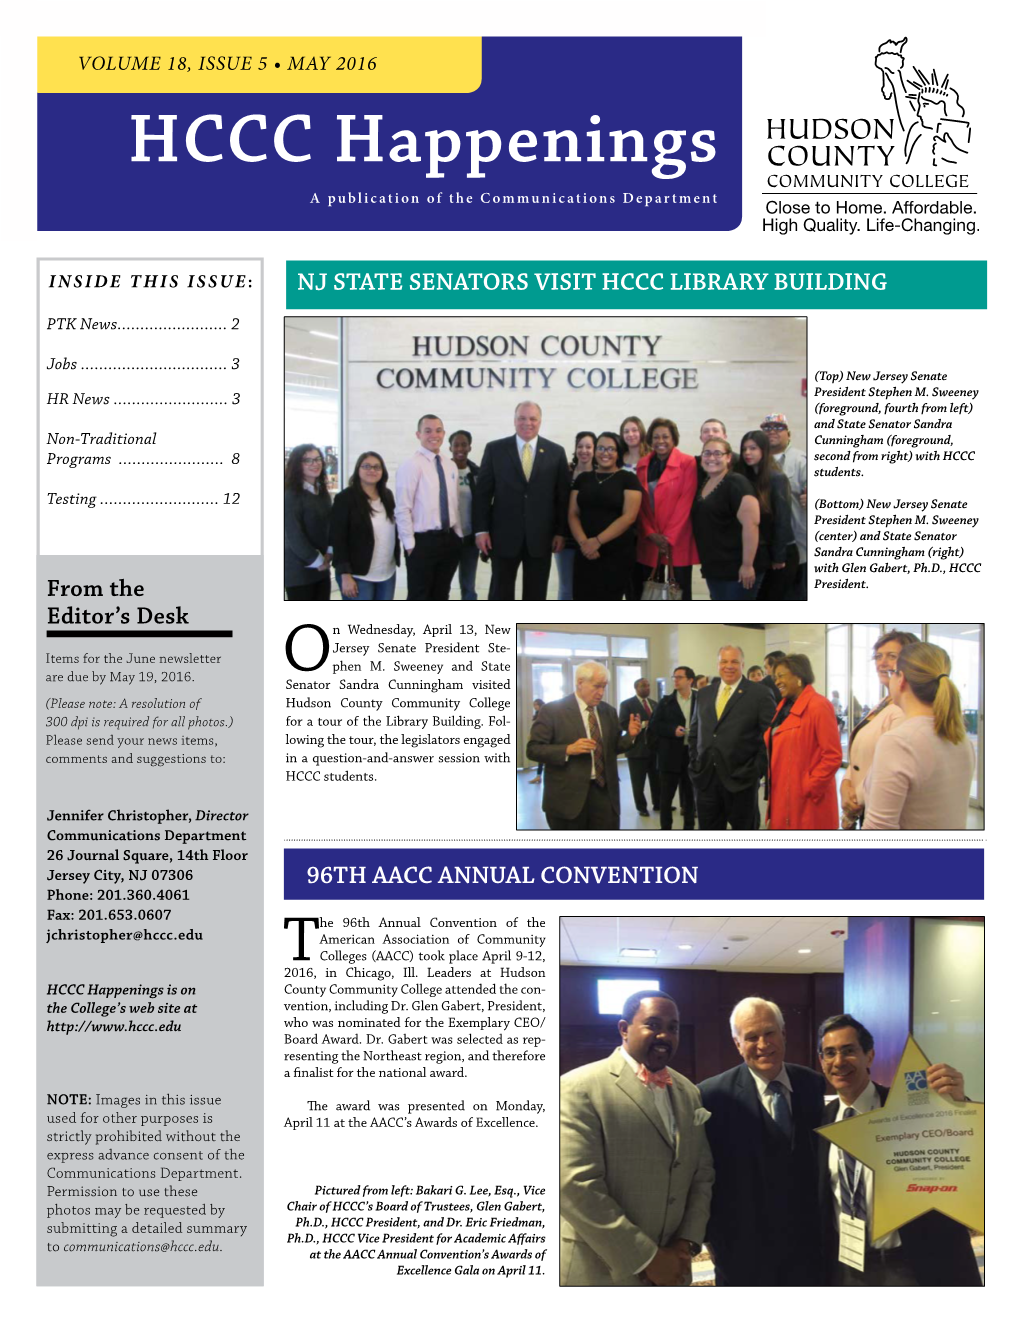 HCCC Happenings a Publication of the Communications Department